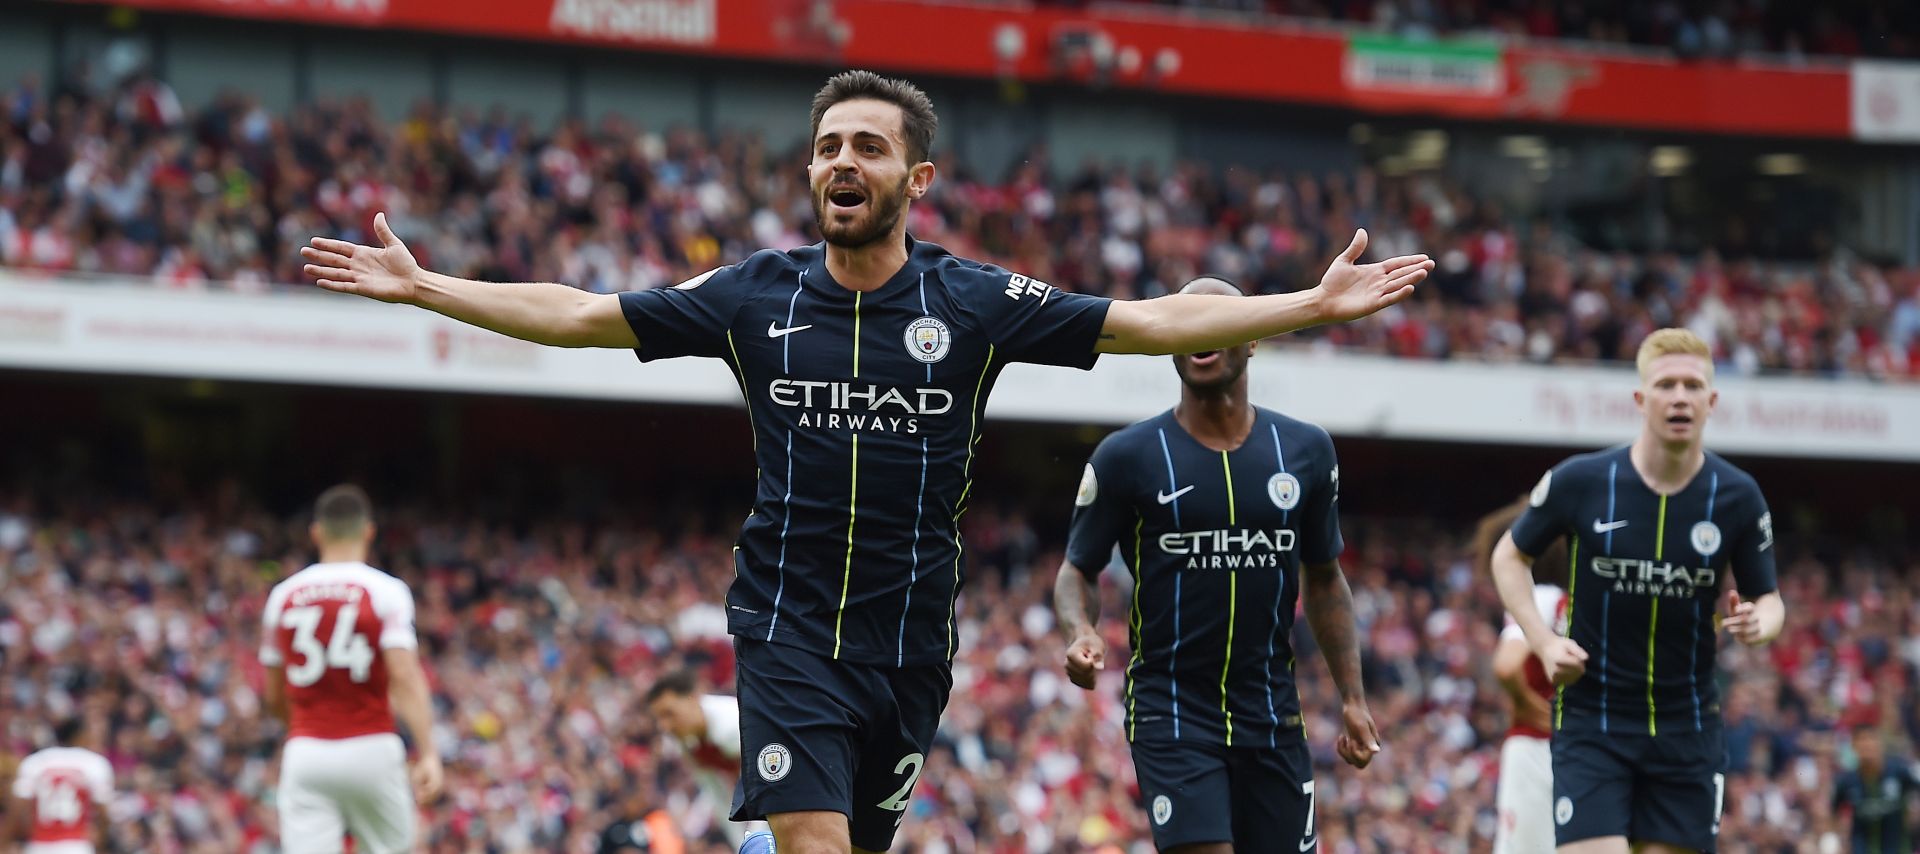 epa06946114 Manchester City's Bernardo Silva celebrates after scoring during the English Premier League soccer match between Arsenal FC and Manchester City at the Emirates Stadium in London, Britain, 12 August 2018.  EPA/ANDY RAIN EDITORIAL USE ONLY. No use with unauthorized audio, video, data, fixture lists, club/league logos or 'live' services. Online in-match use limited to 75 images, no video emulation. No use in betting, games or single club/league/player publications.